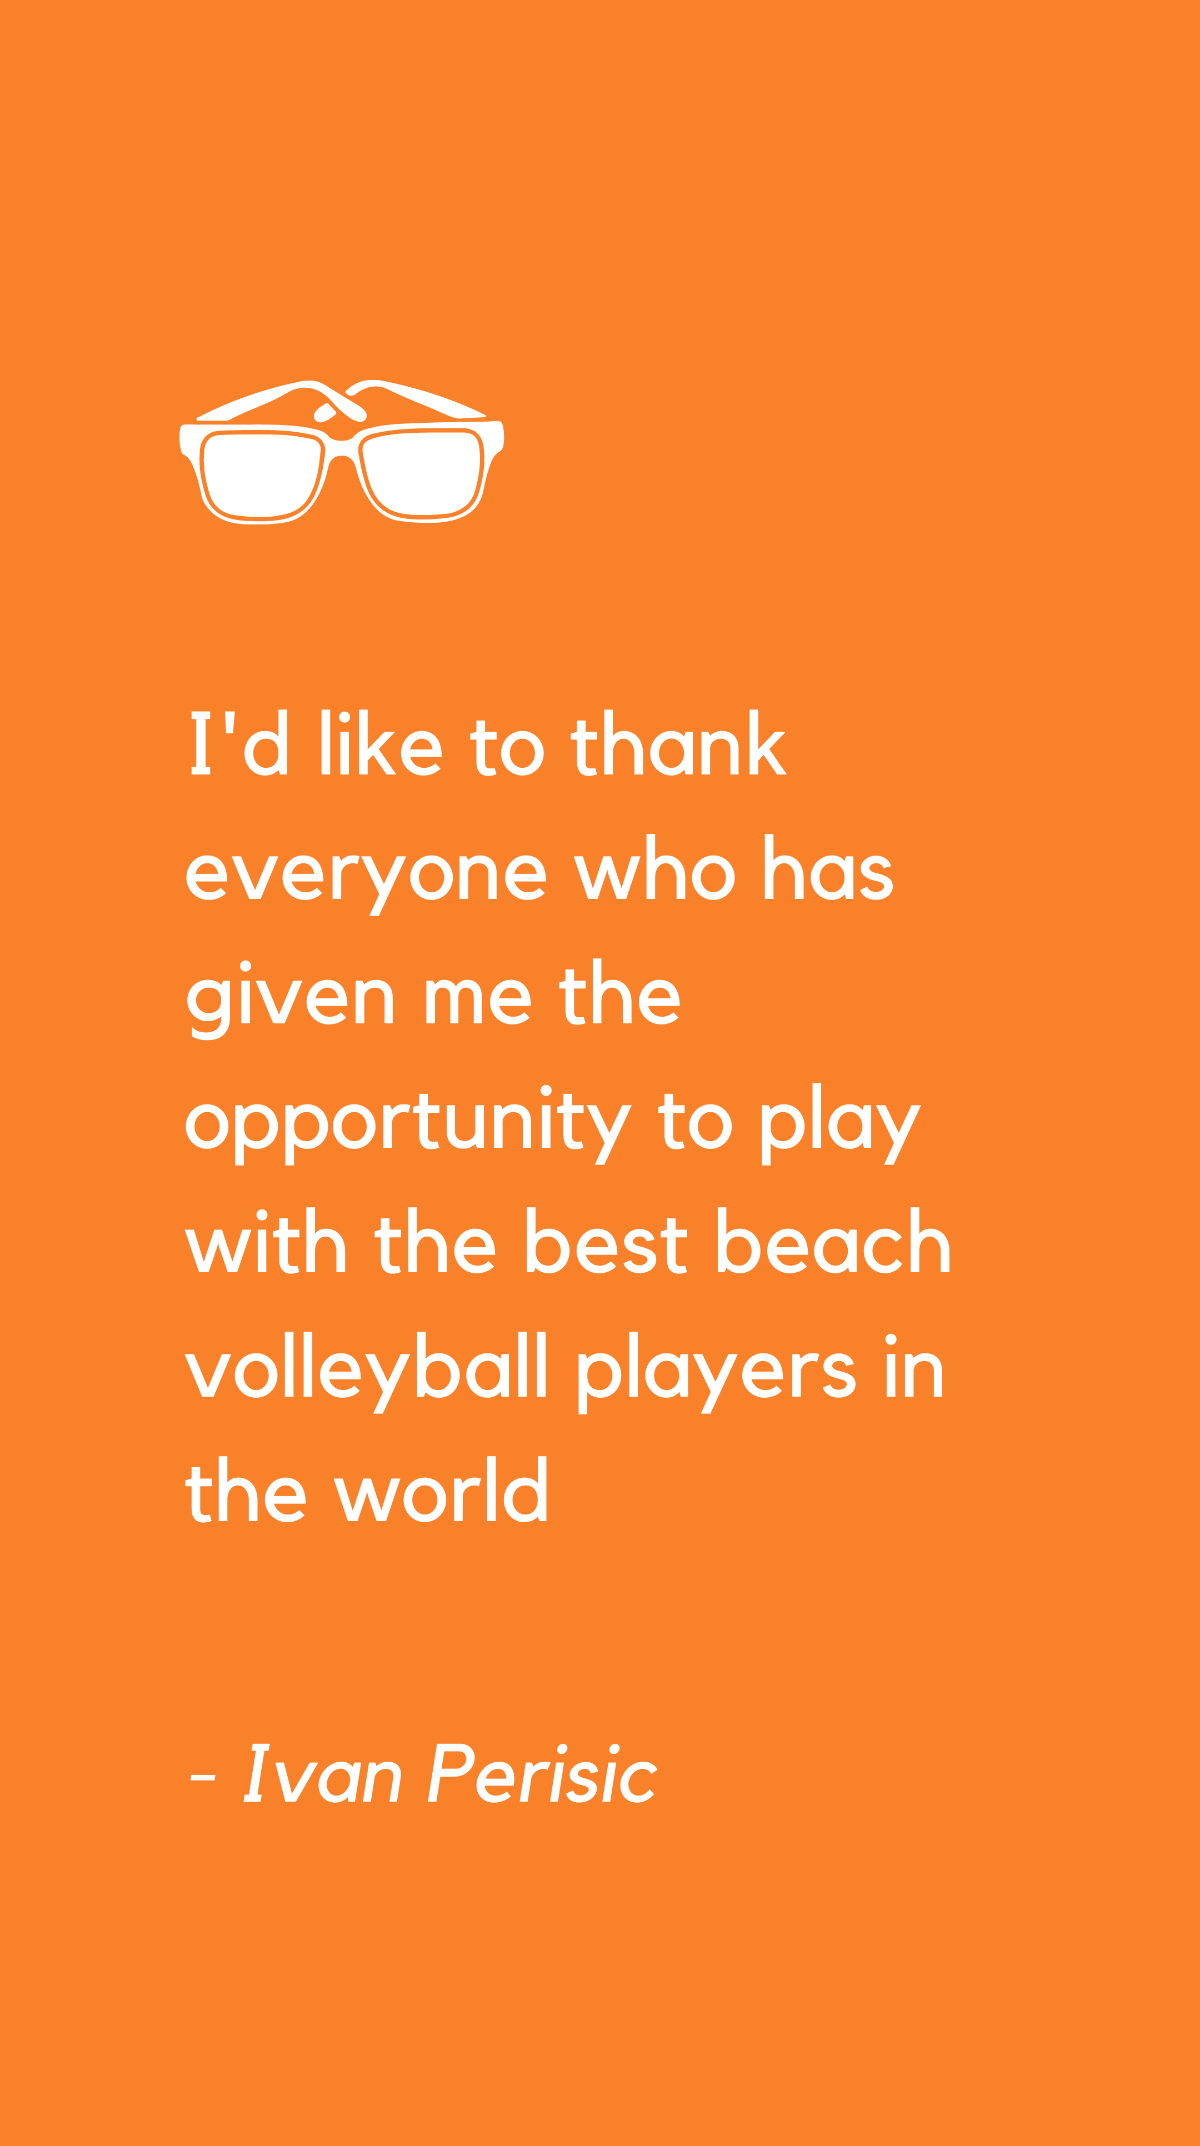 Ivan Perisic - I'd like to thank everyone who has given me the opportunity to play with the best beach volleyball players in the world Template